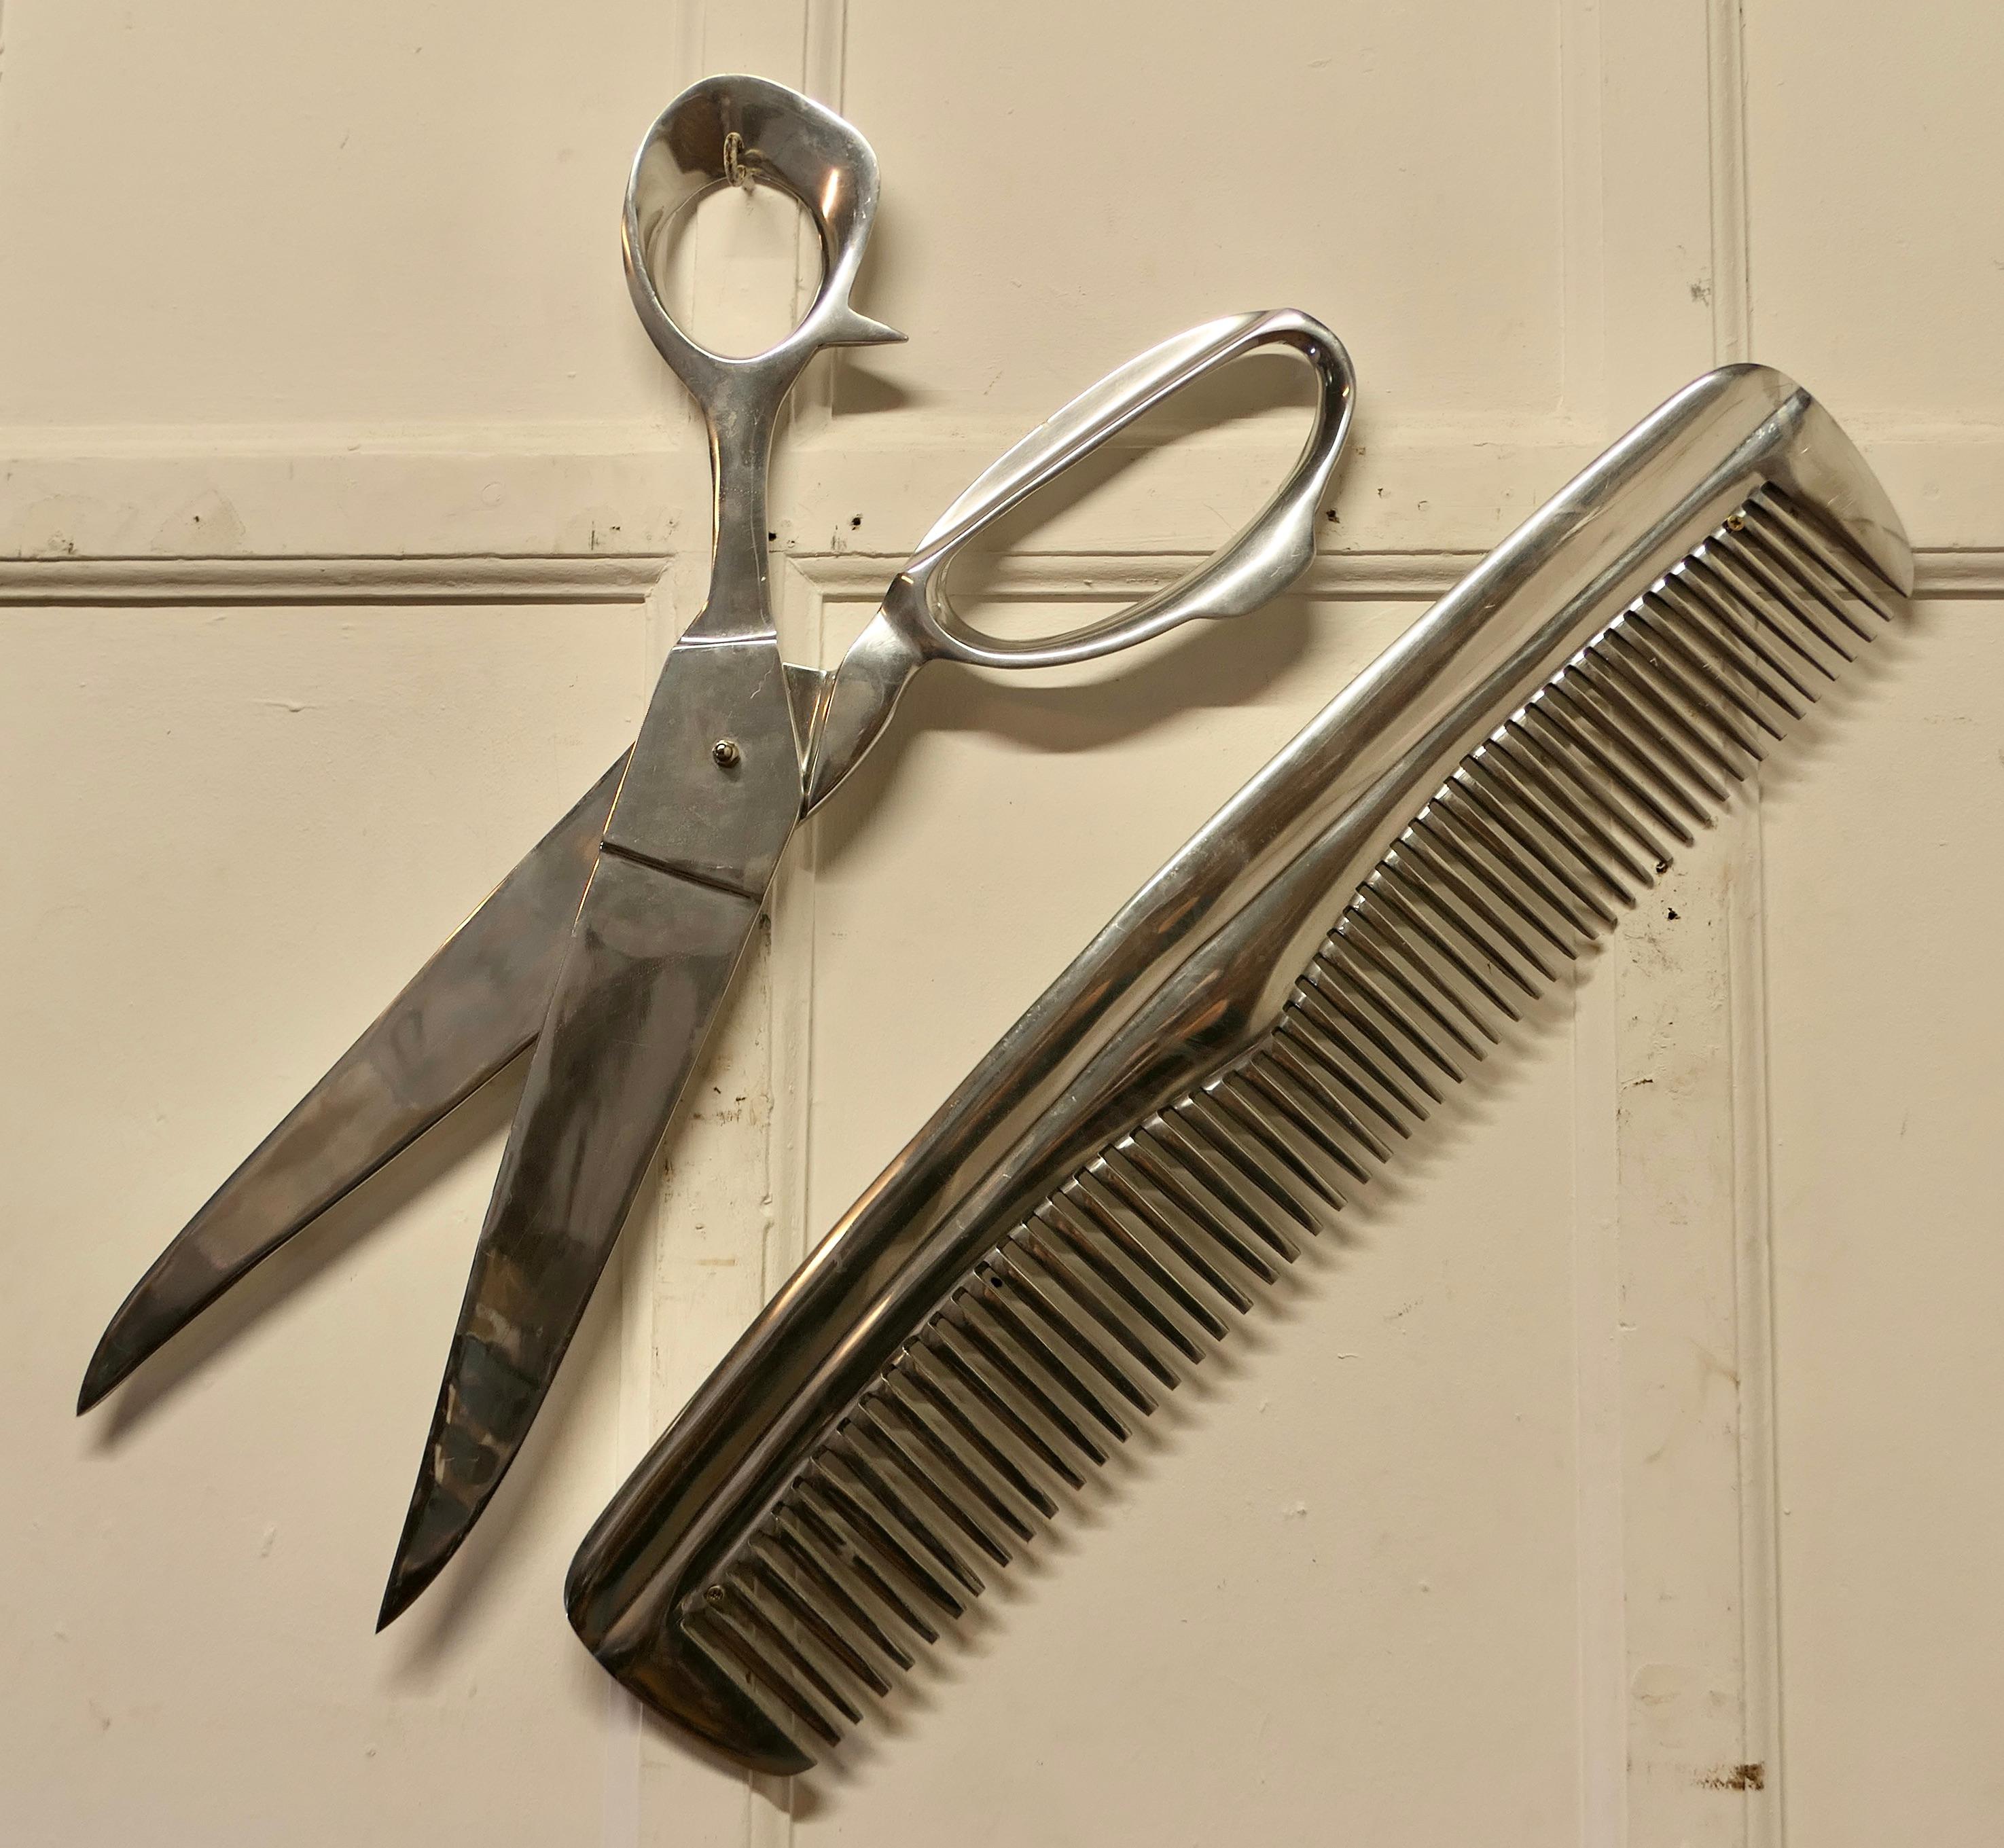 Mid-20th Century Barber Shop Trade Sign, Giant Comb and Scissors   Larger than life  For Sale